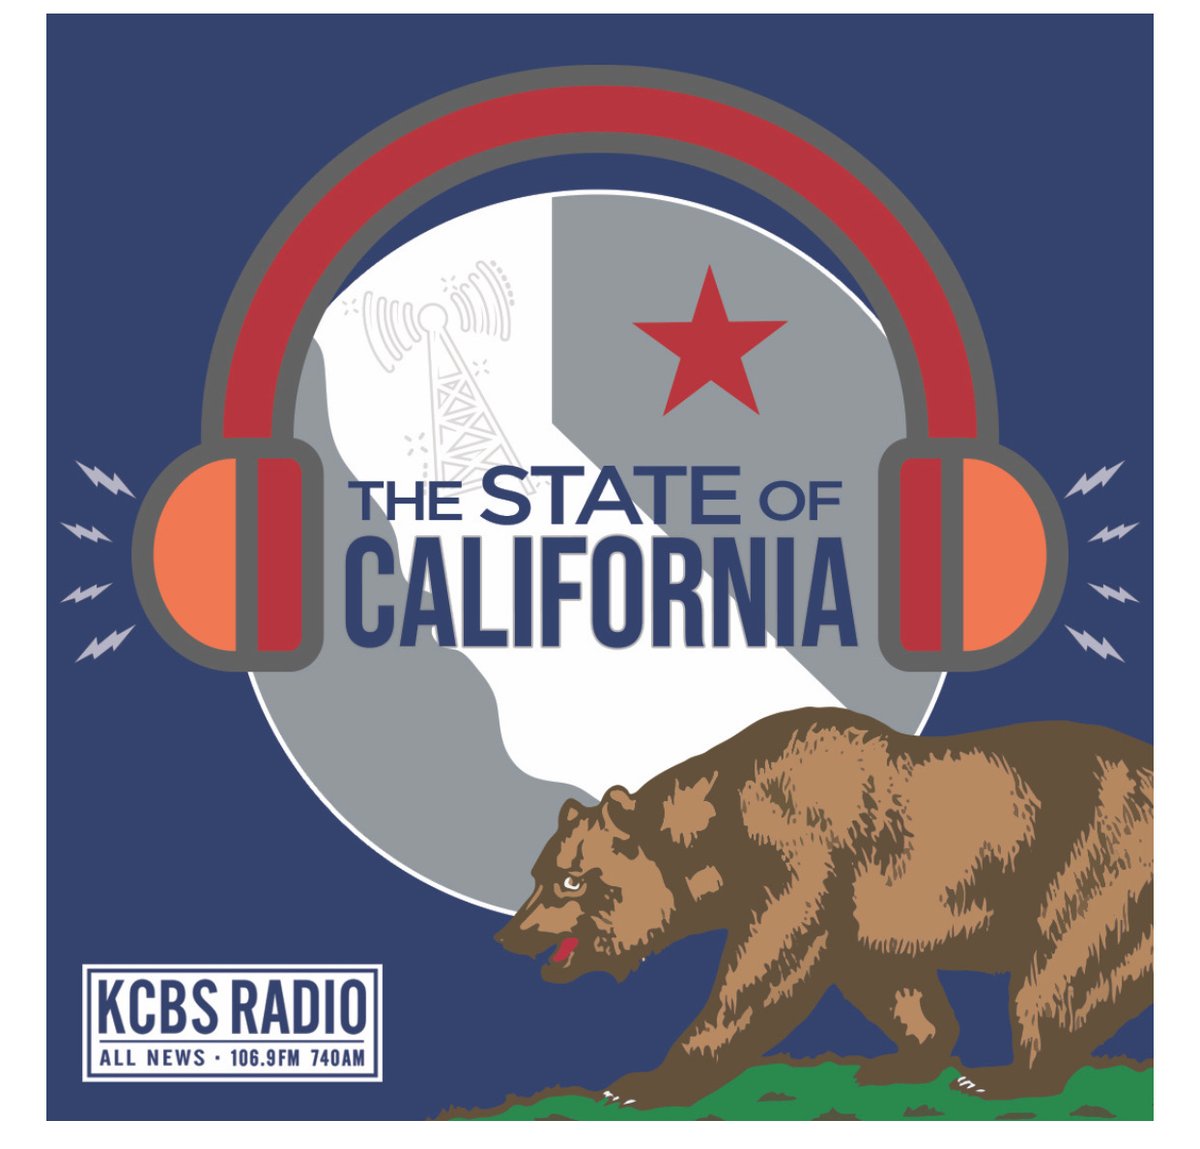 Live at 3:30pm PT on today's #StateOfCA on @KCBSRadio, we'll be joined by @SaruJayaraman of @onefairwage to talk about the campaign for a $20 statewide minimum wage for all Californians, building on the passage of the $20 wage for fast food. Listen live: bit.ly/3Jx7aHk